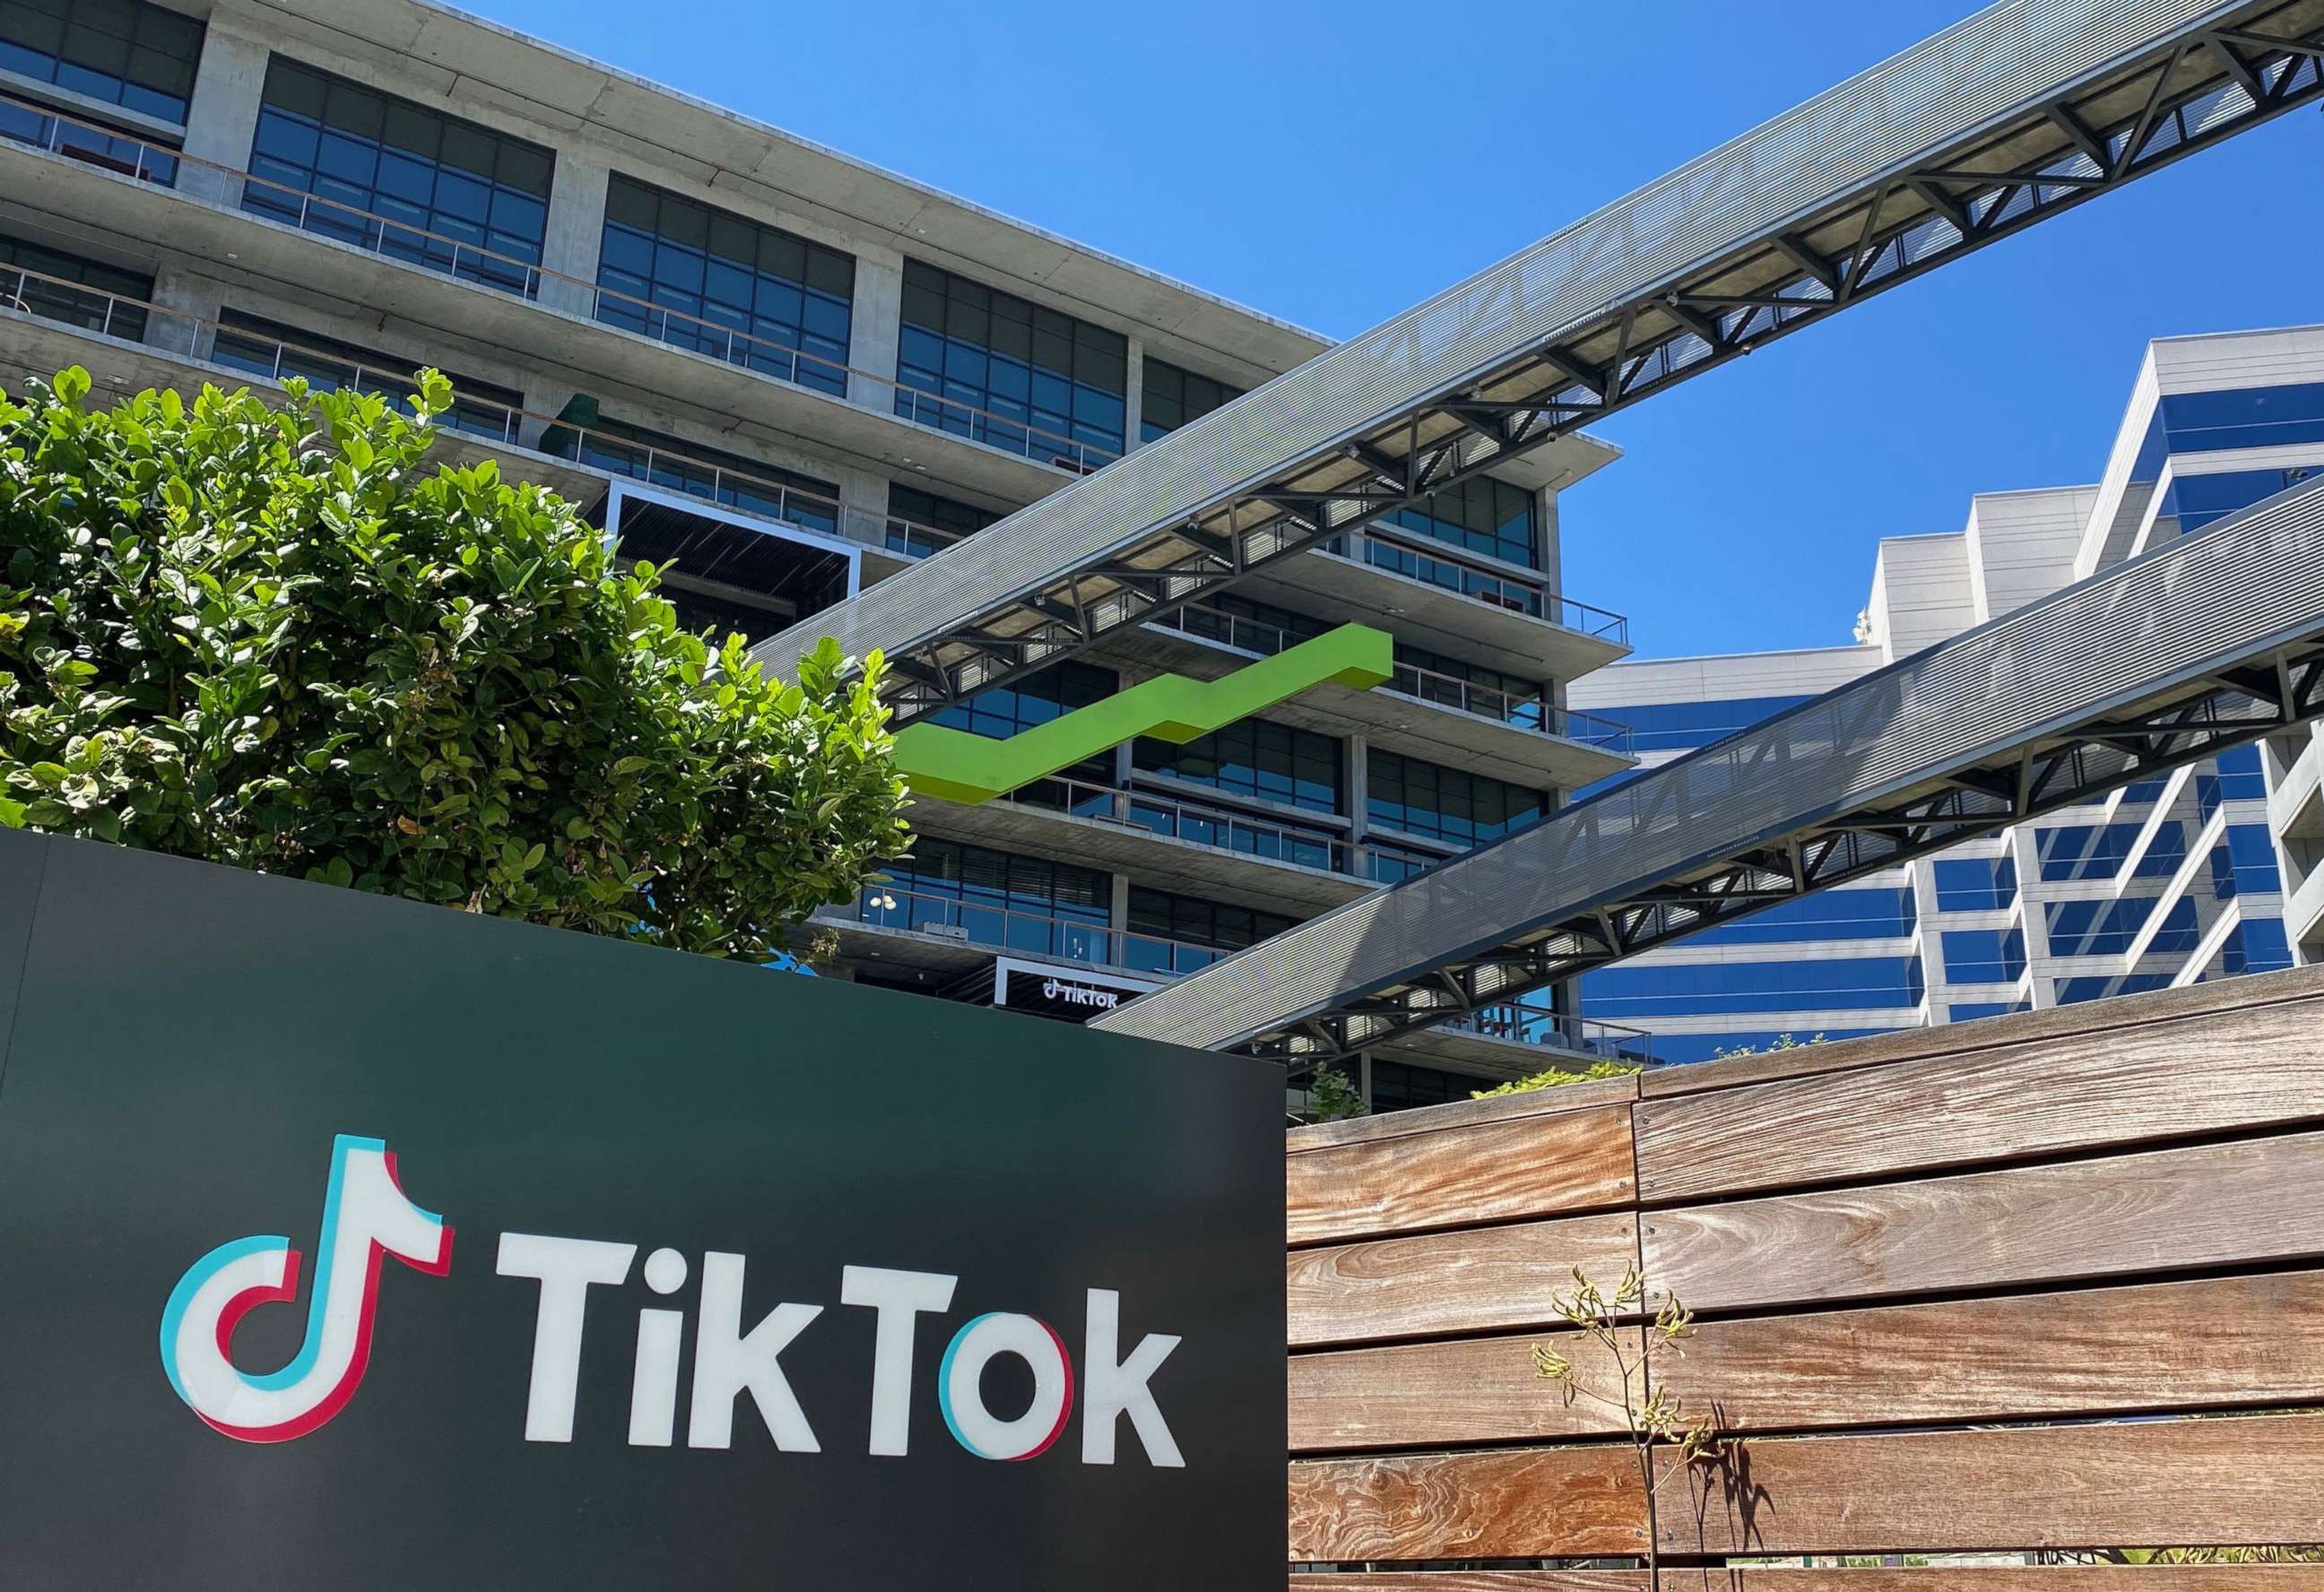 PHOTO: The logo of Chinese video app TikTok is seen on the side of the company's new office space at the C3 campus in Culver City, Calif., Aug. 11, 2020.